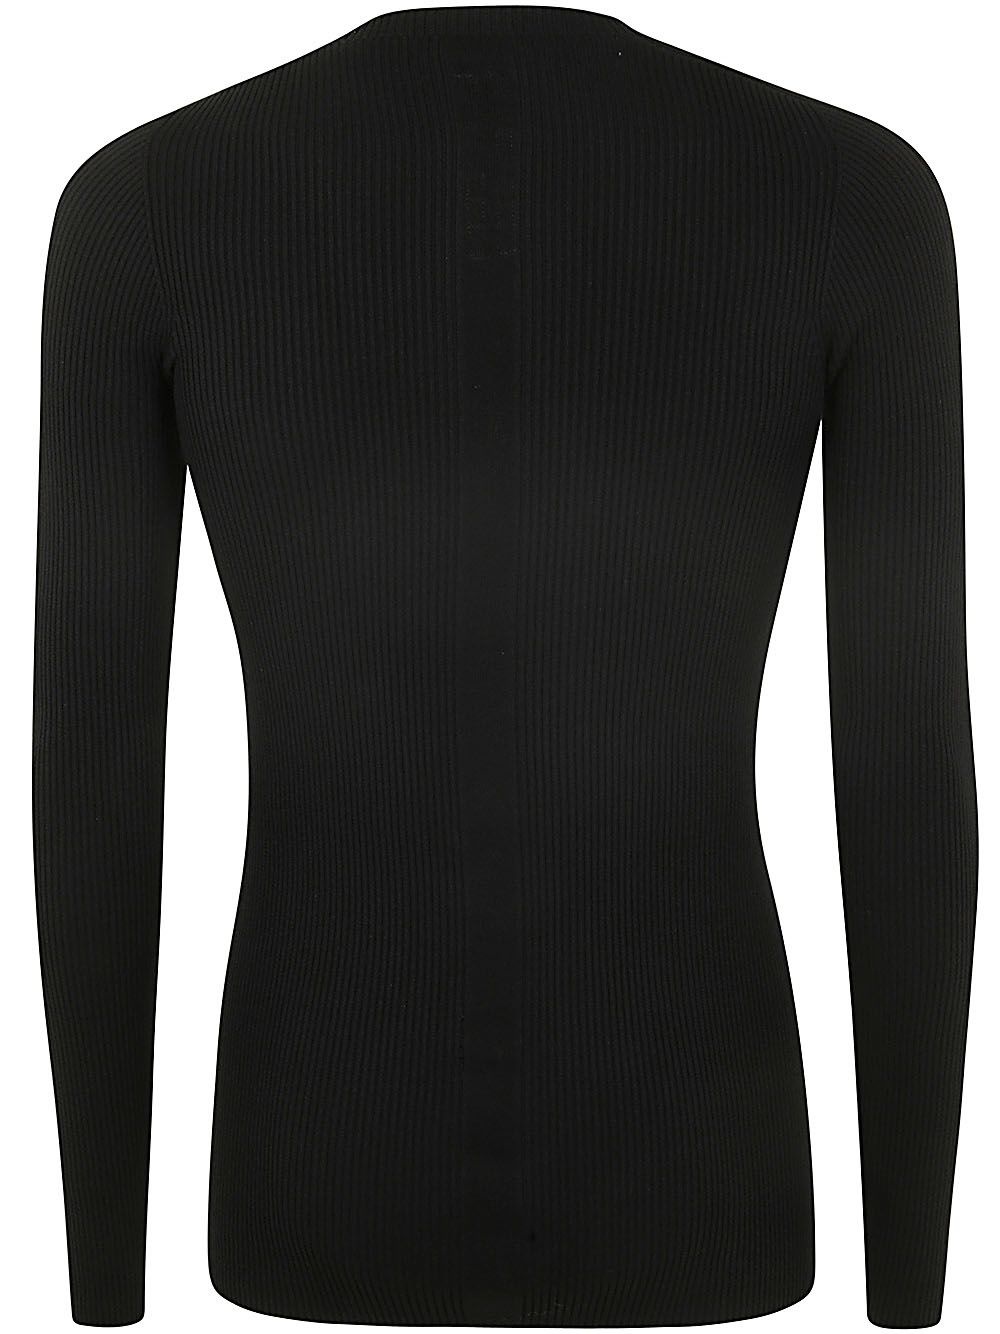 RIBBED ROUND NECK SWEATER - 2